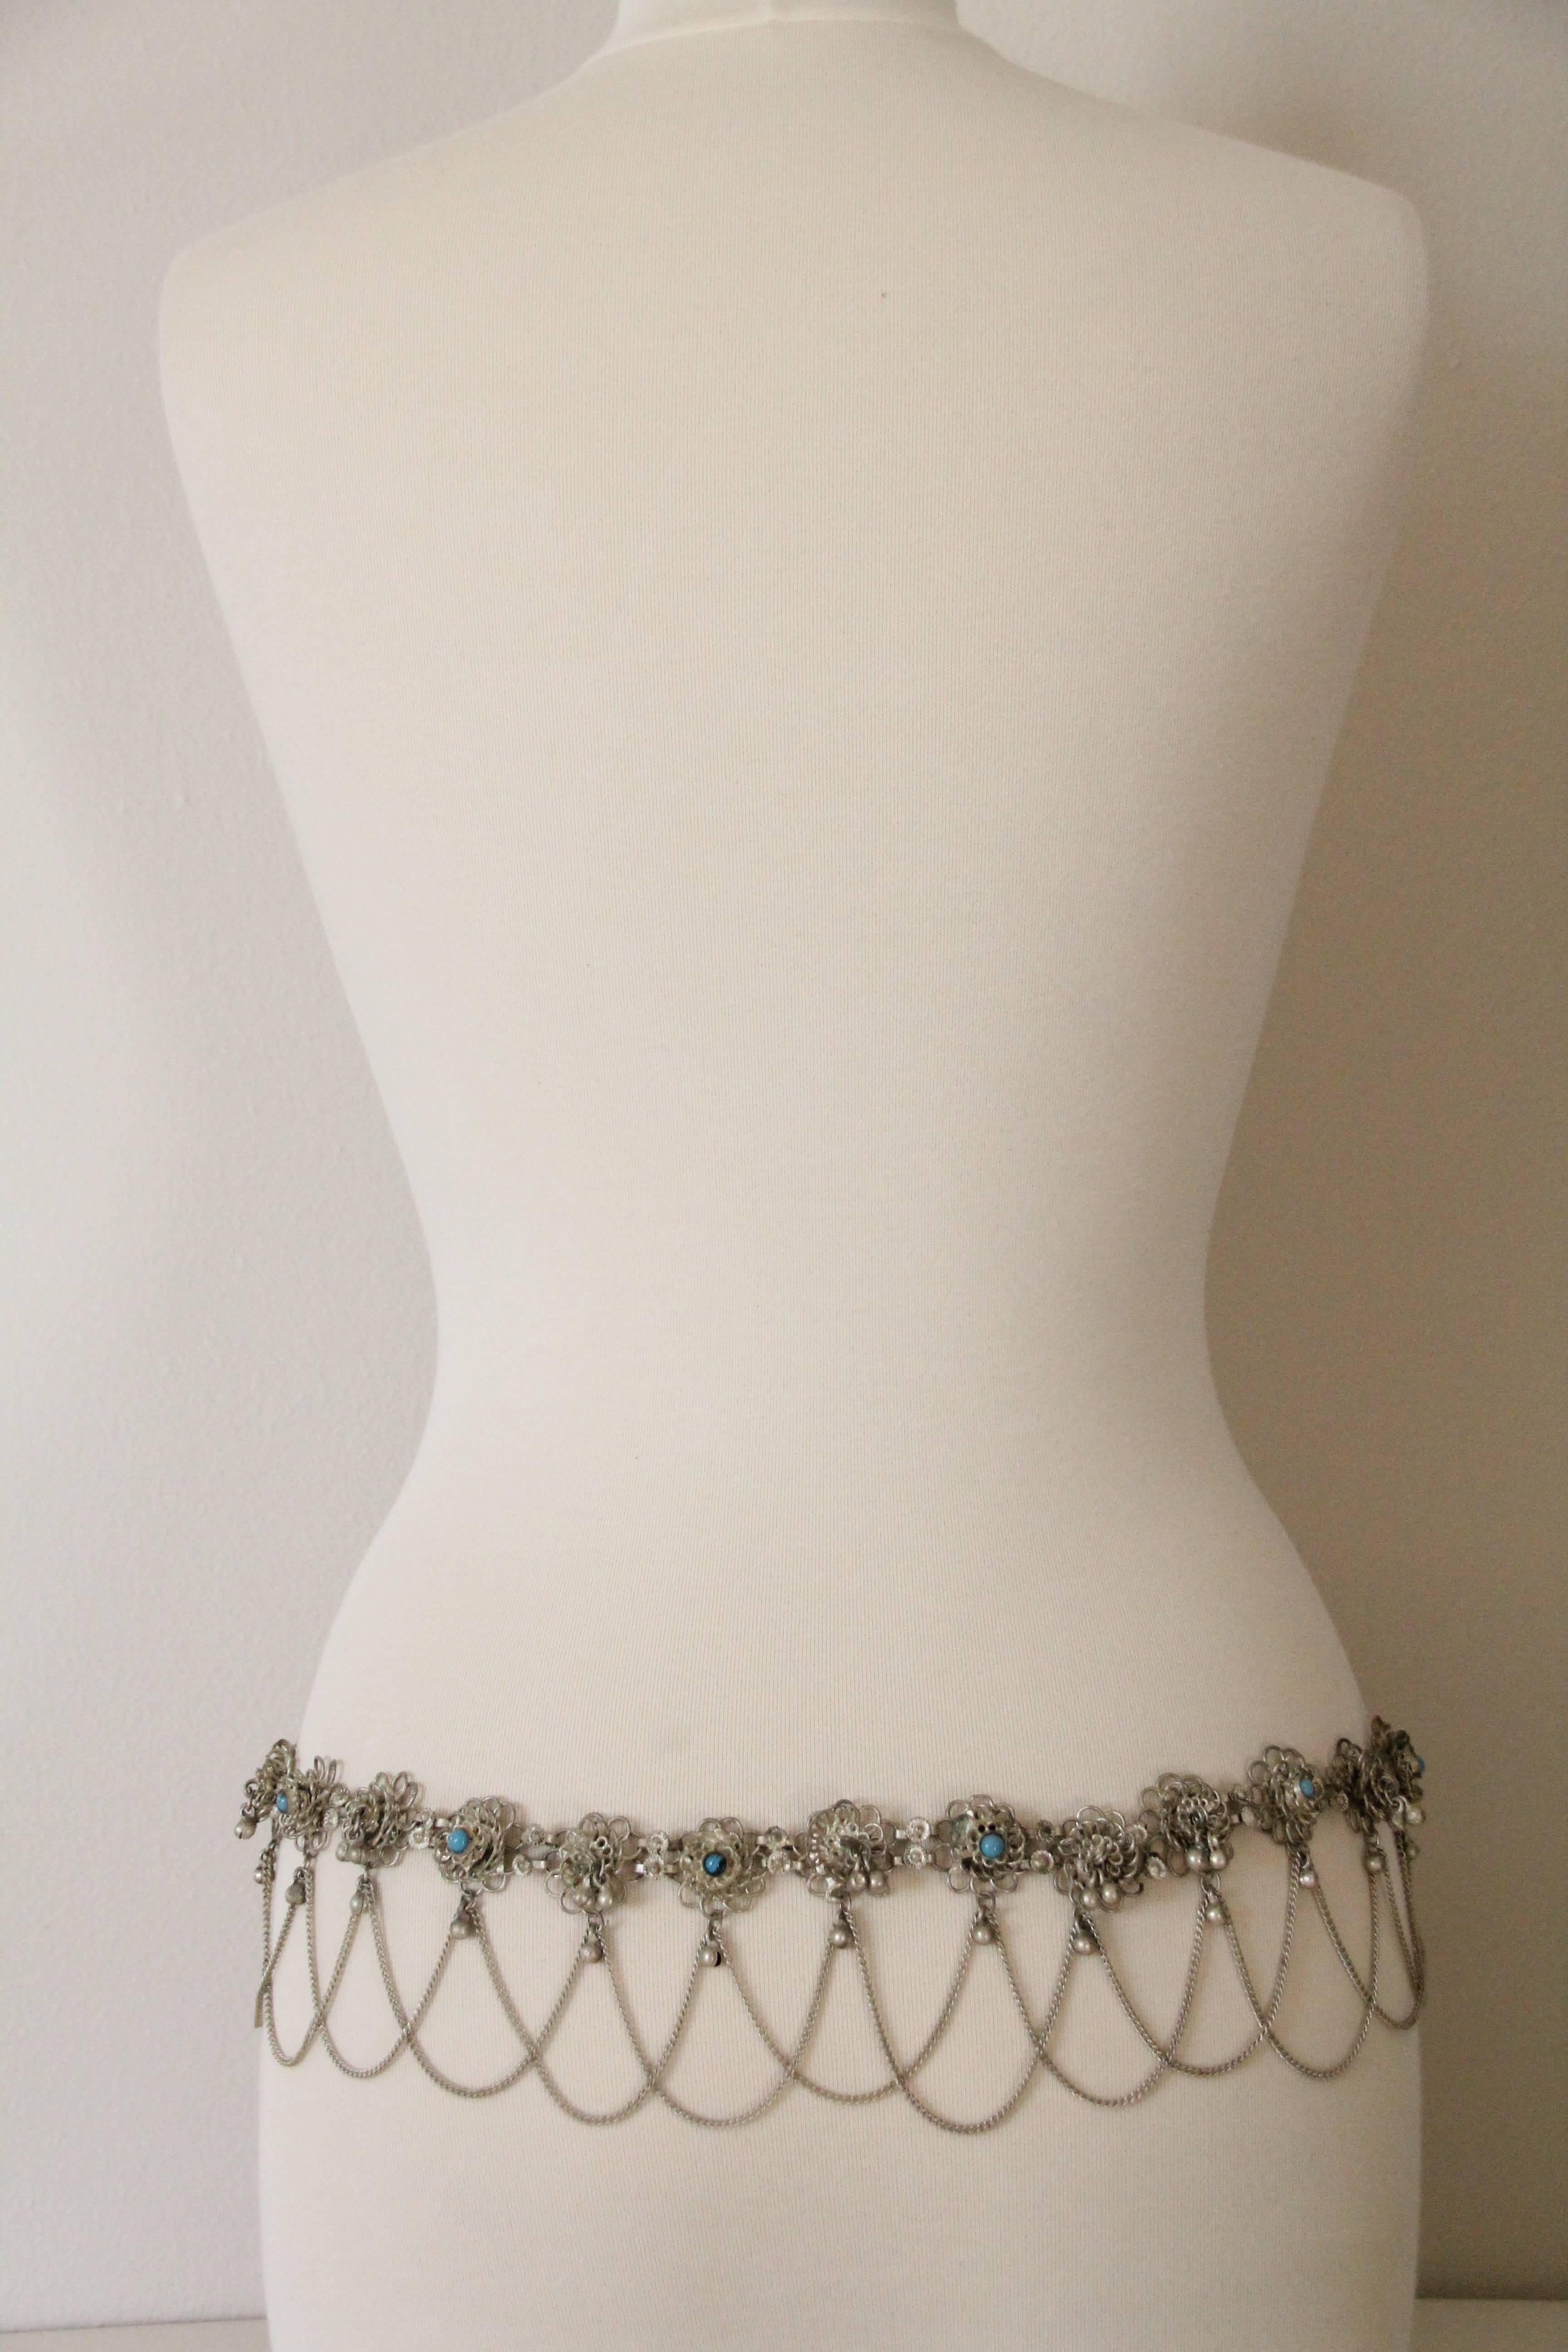 A beautiful 1970s coin silver Indian filigree chain belt with faux turquoise accents, chain swags and large center accent piece.  Hook closure. 

Adjustable size and will fit up to a 35